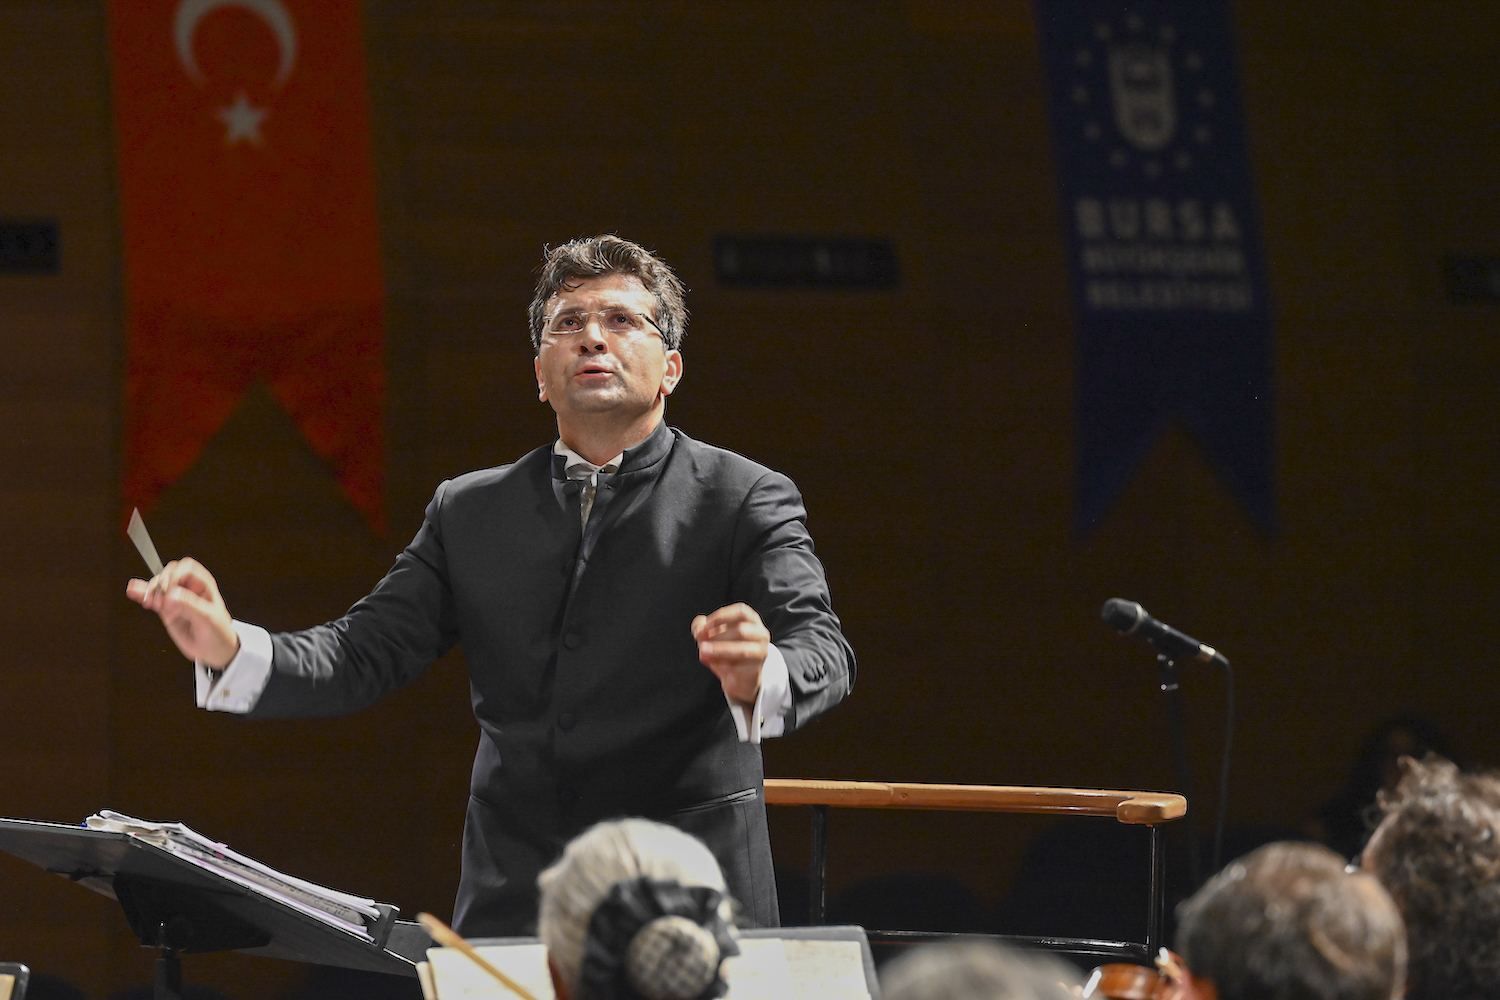 National conductor dazzles crowd at TURKSOY Opera Days [PHOTO]